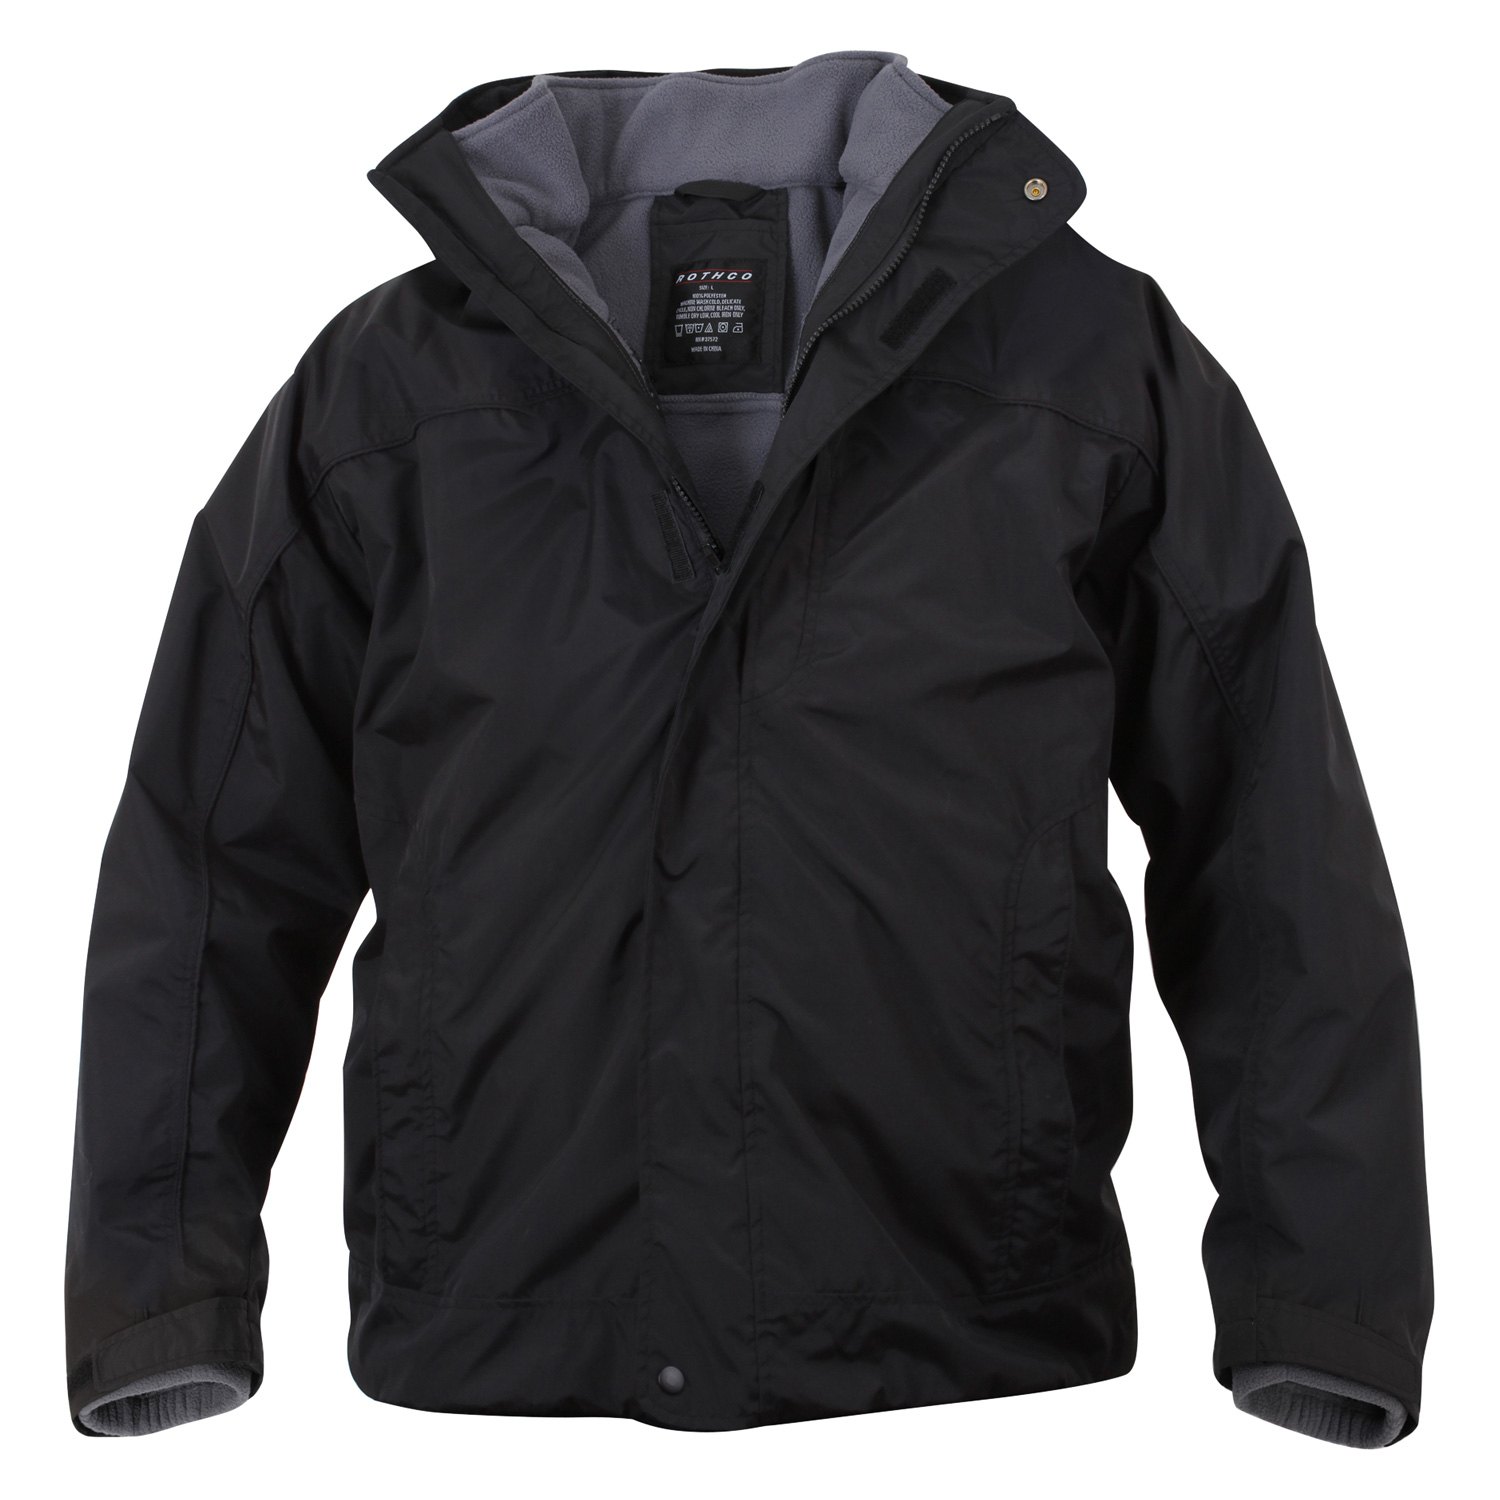 Rothco® 7704-XL - All Weather 3-in-1 Jacket - RECREATIONiD.com